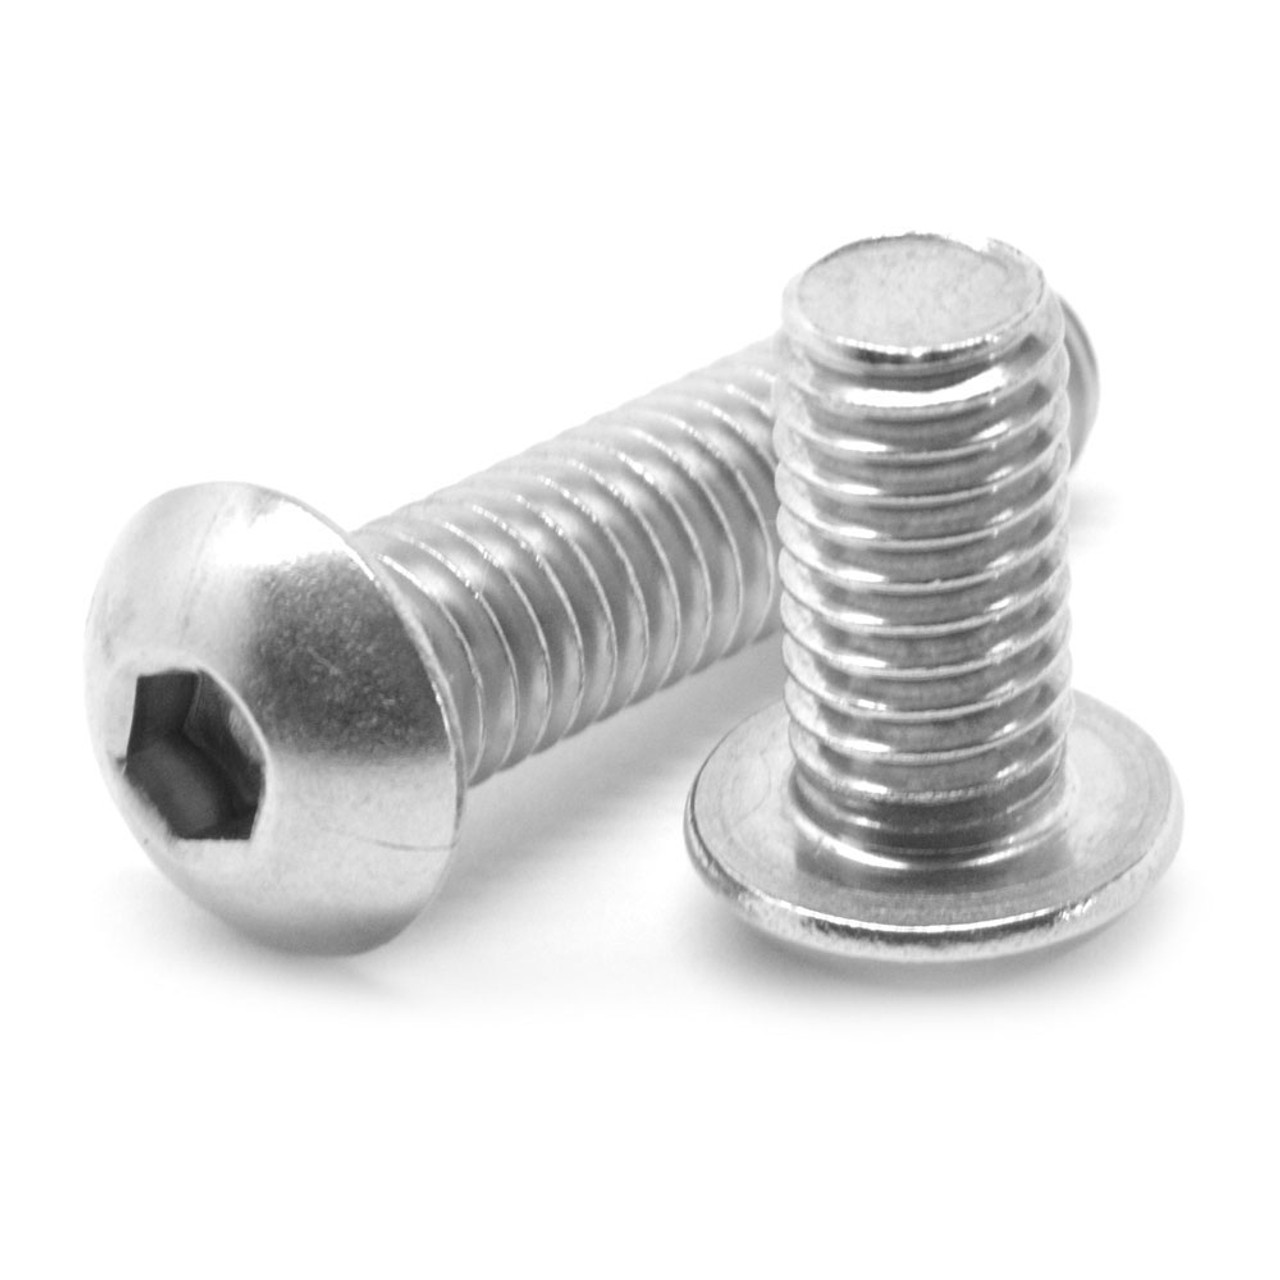 M4 x 0.70 x 40 MM (FT) Coarse Thread ISO 7380 Socket Button Head Cap Screw Stainless Steel 18-8